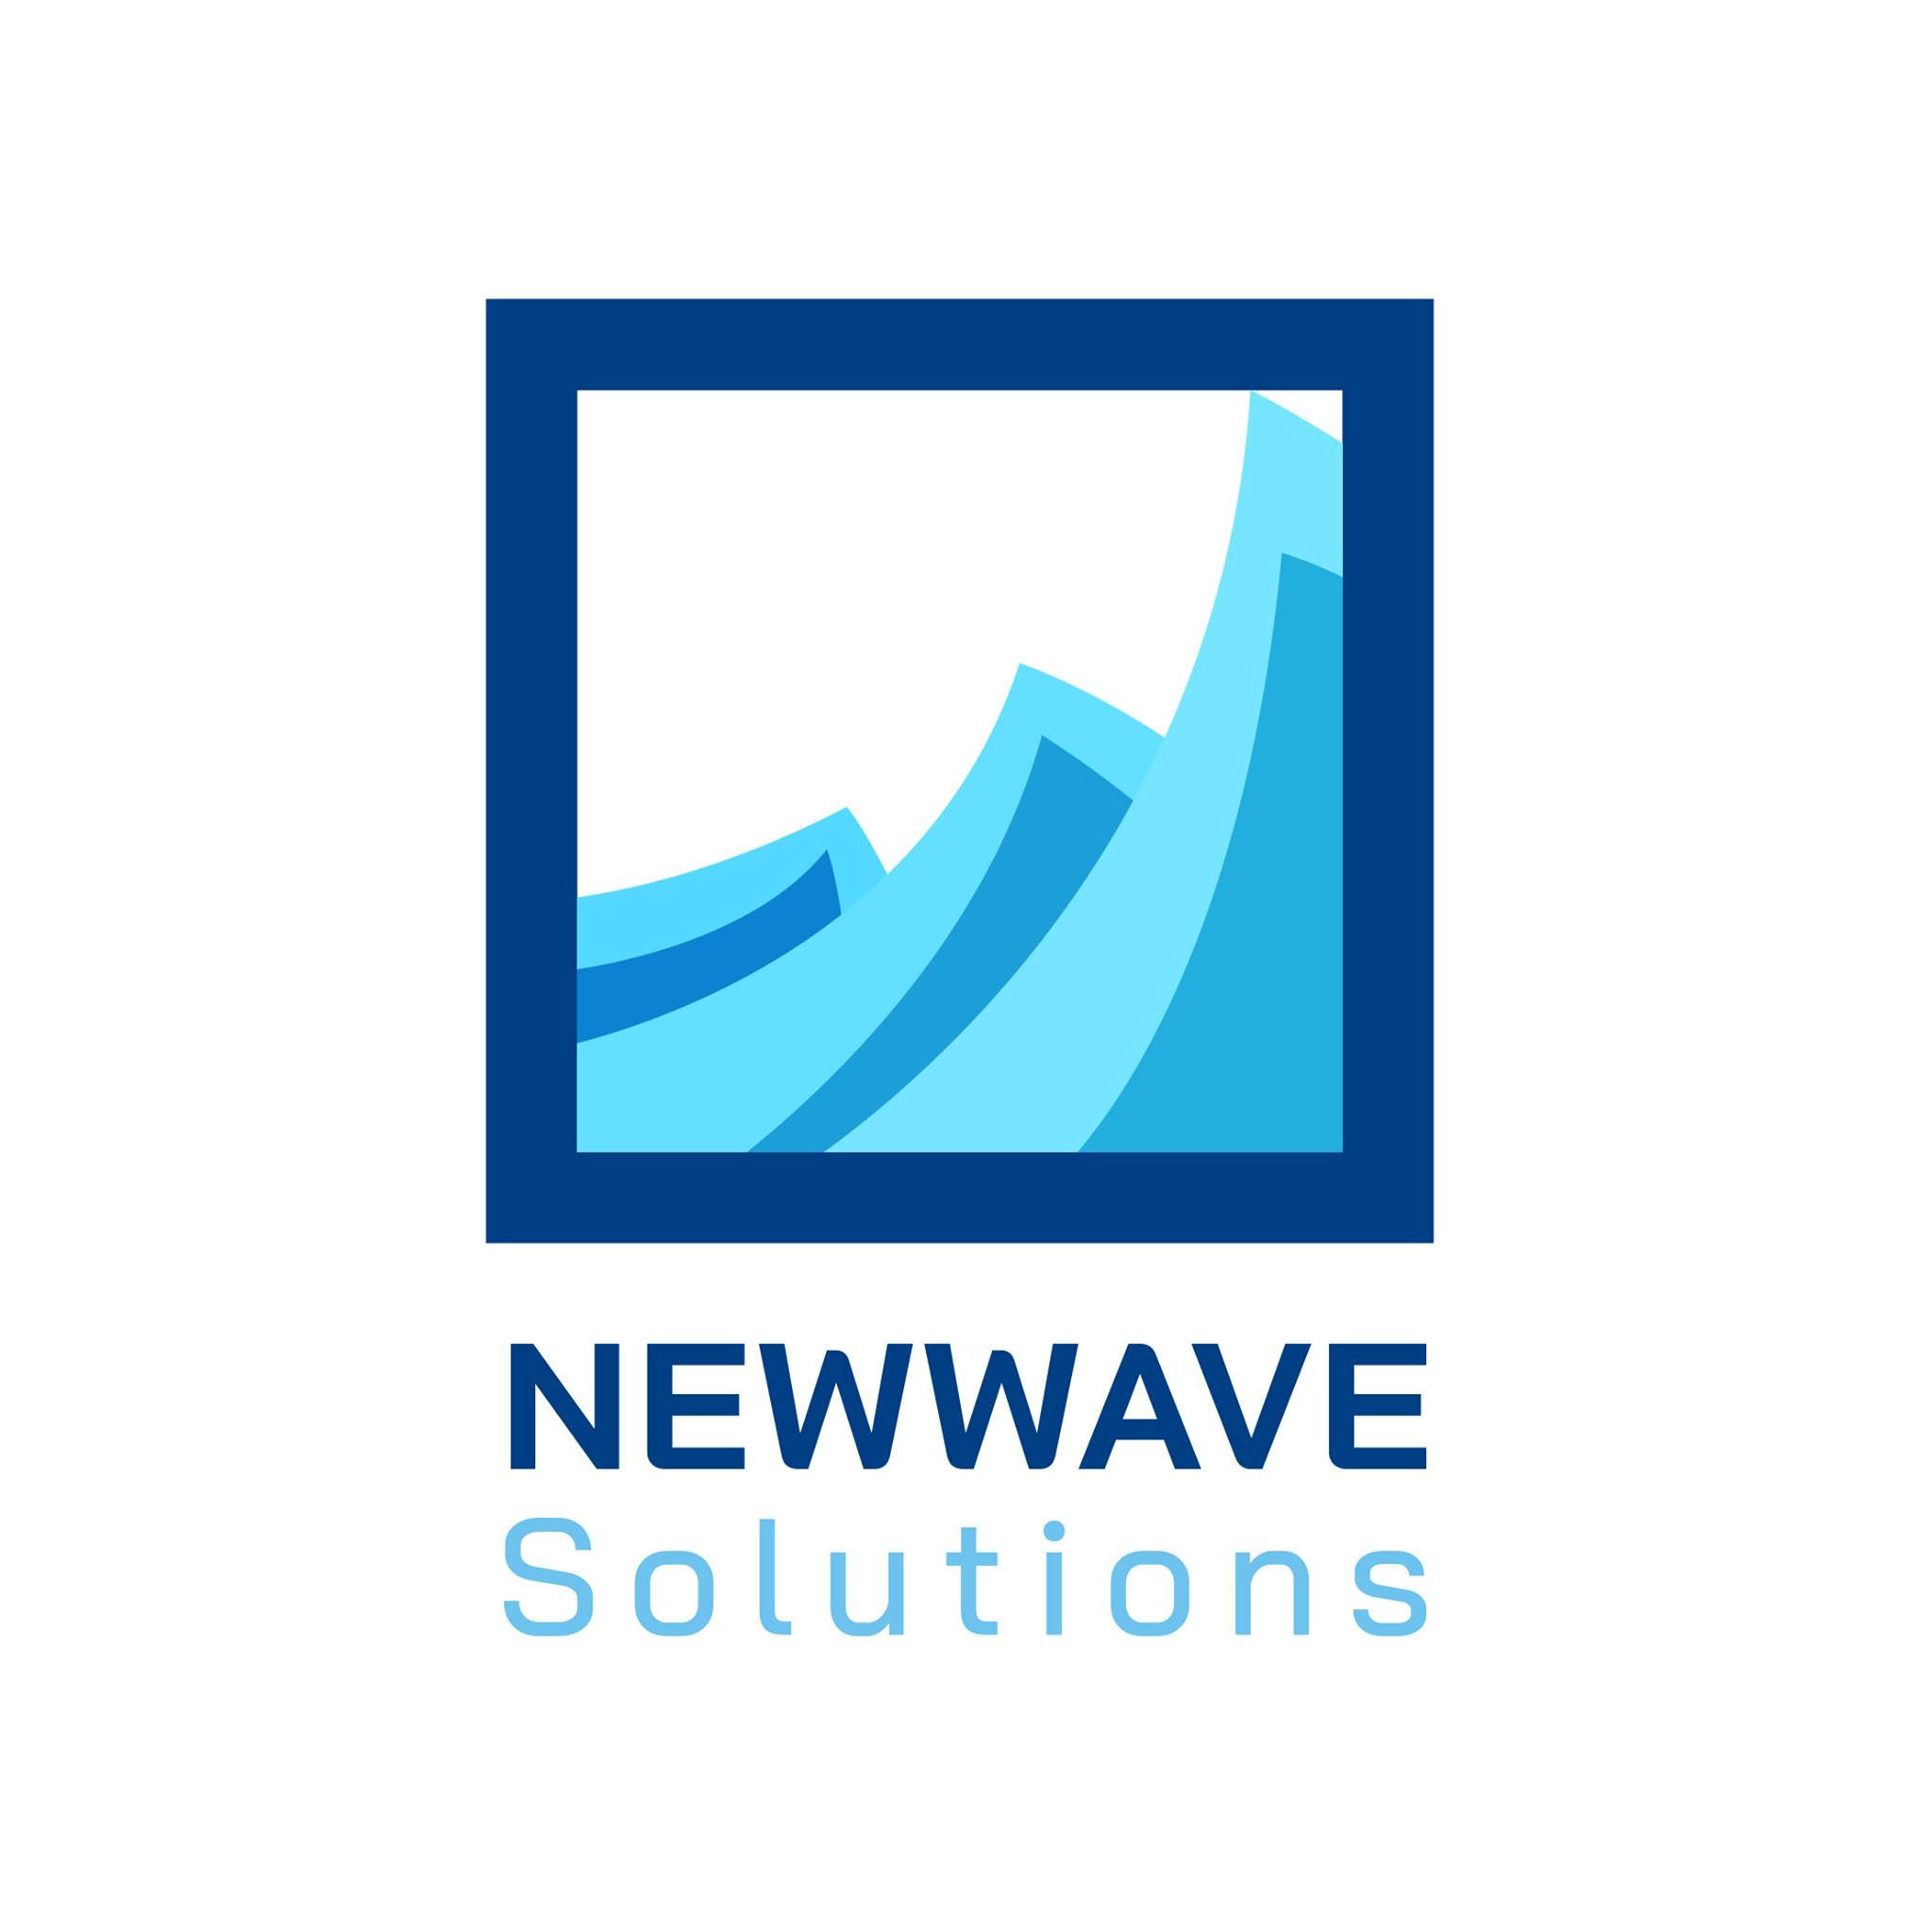 Newwave Solutions logo